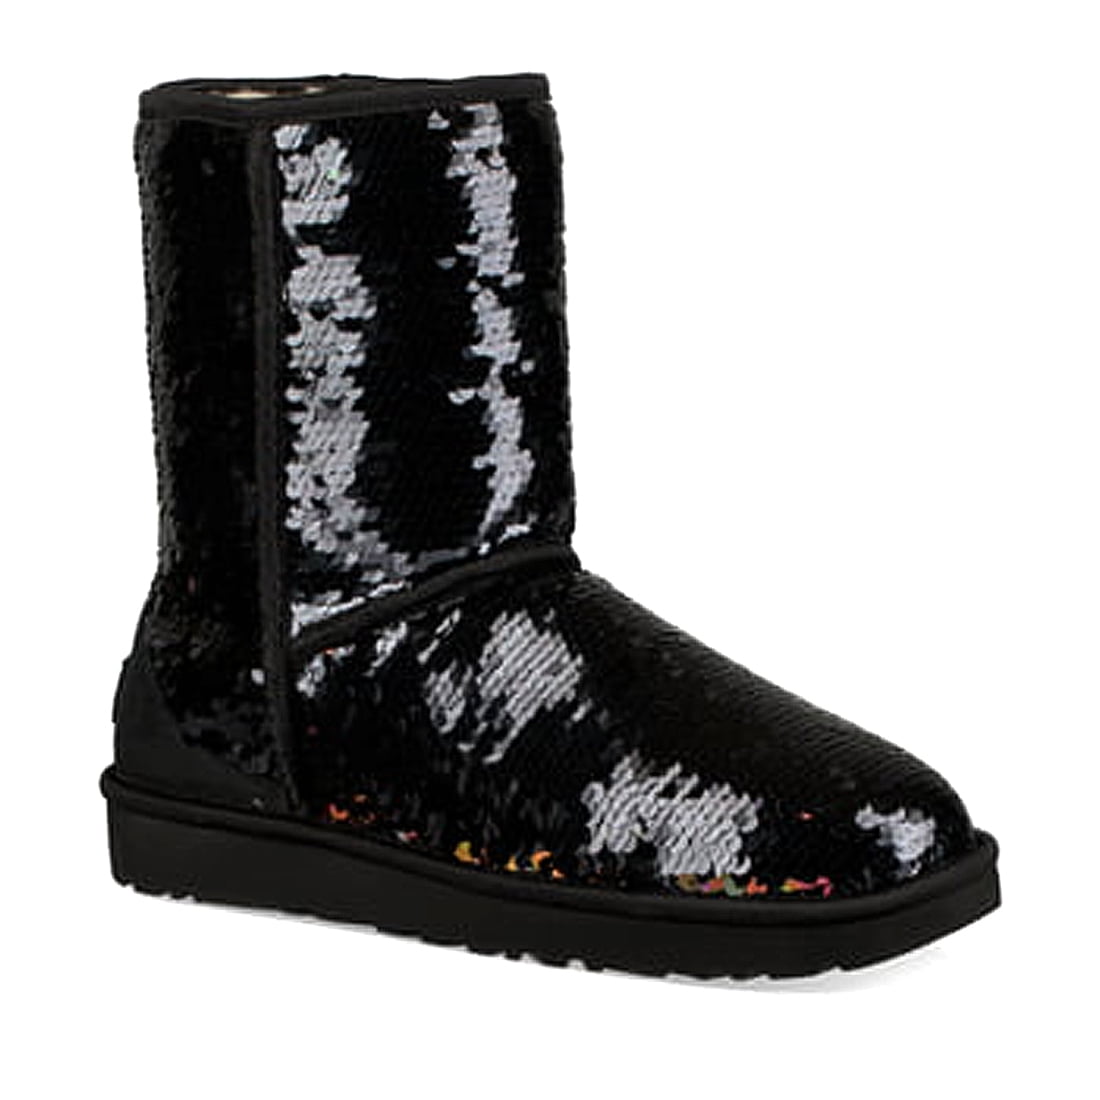 UGG Classic Short Sequin Boot Size 8 - $149 New With Tags - From